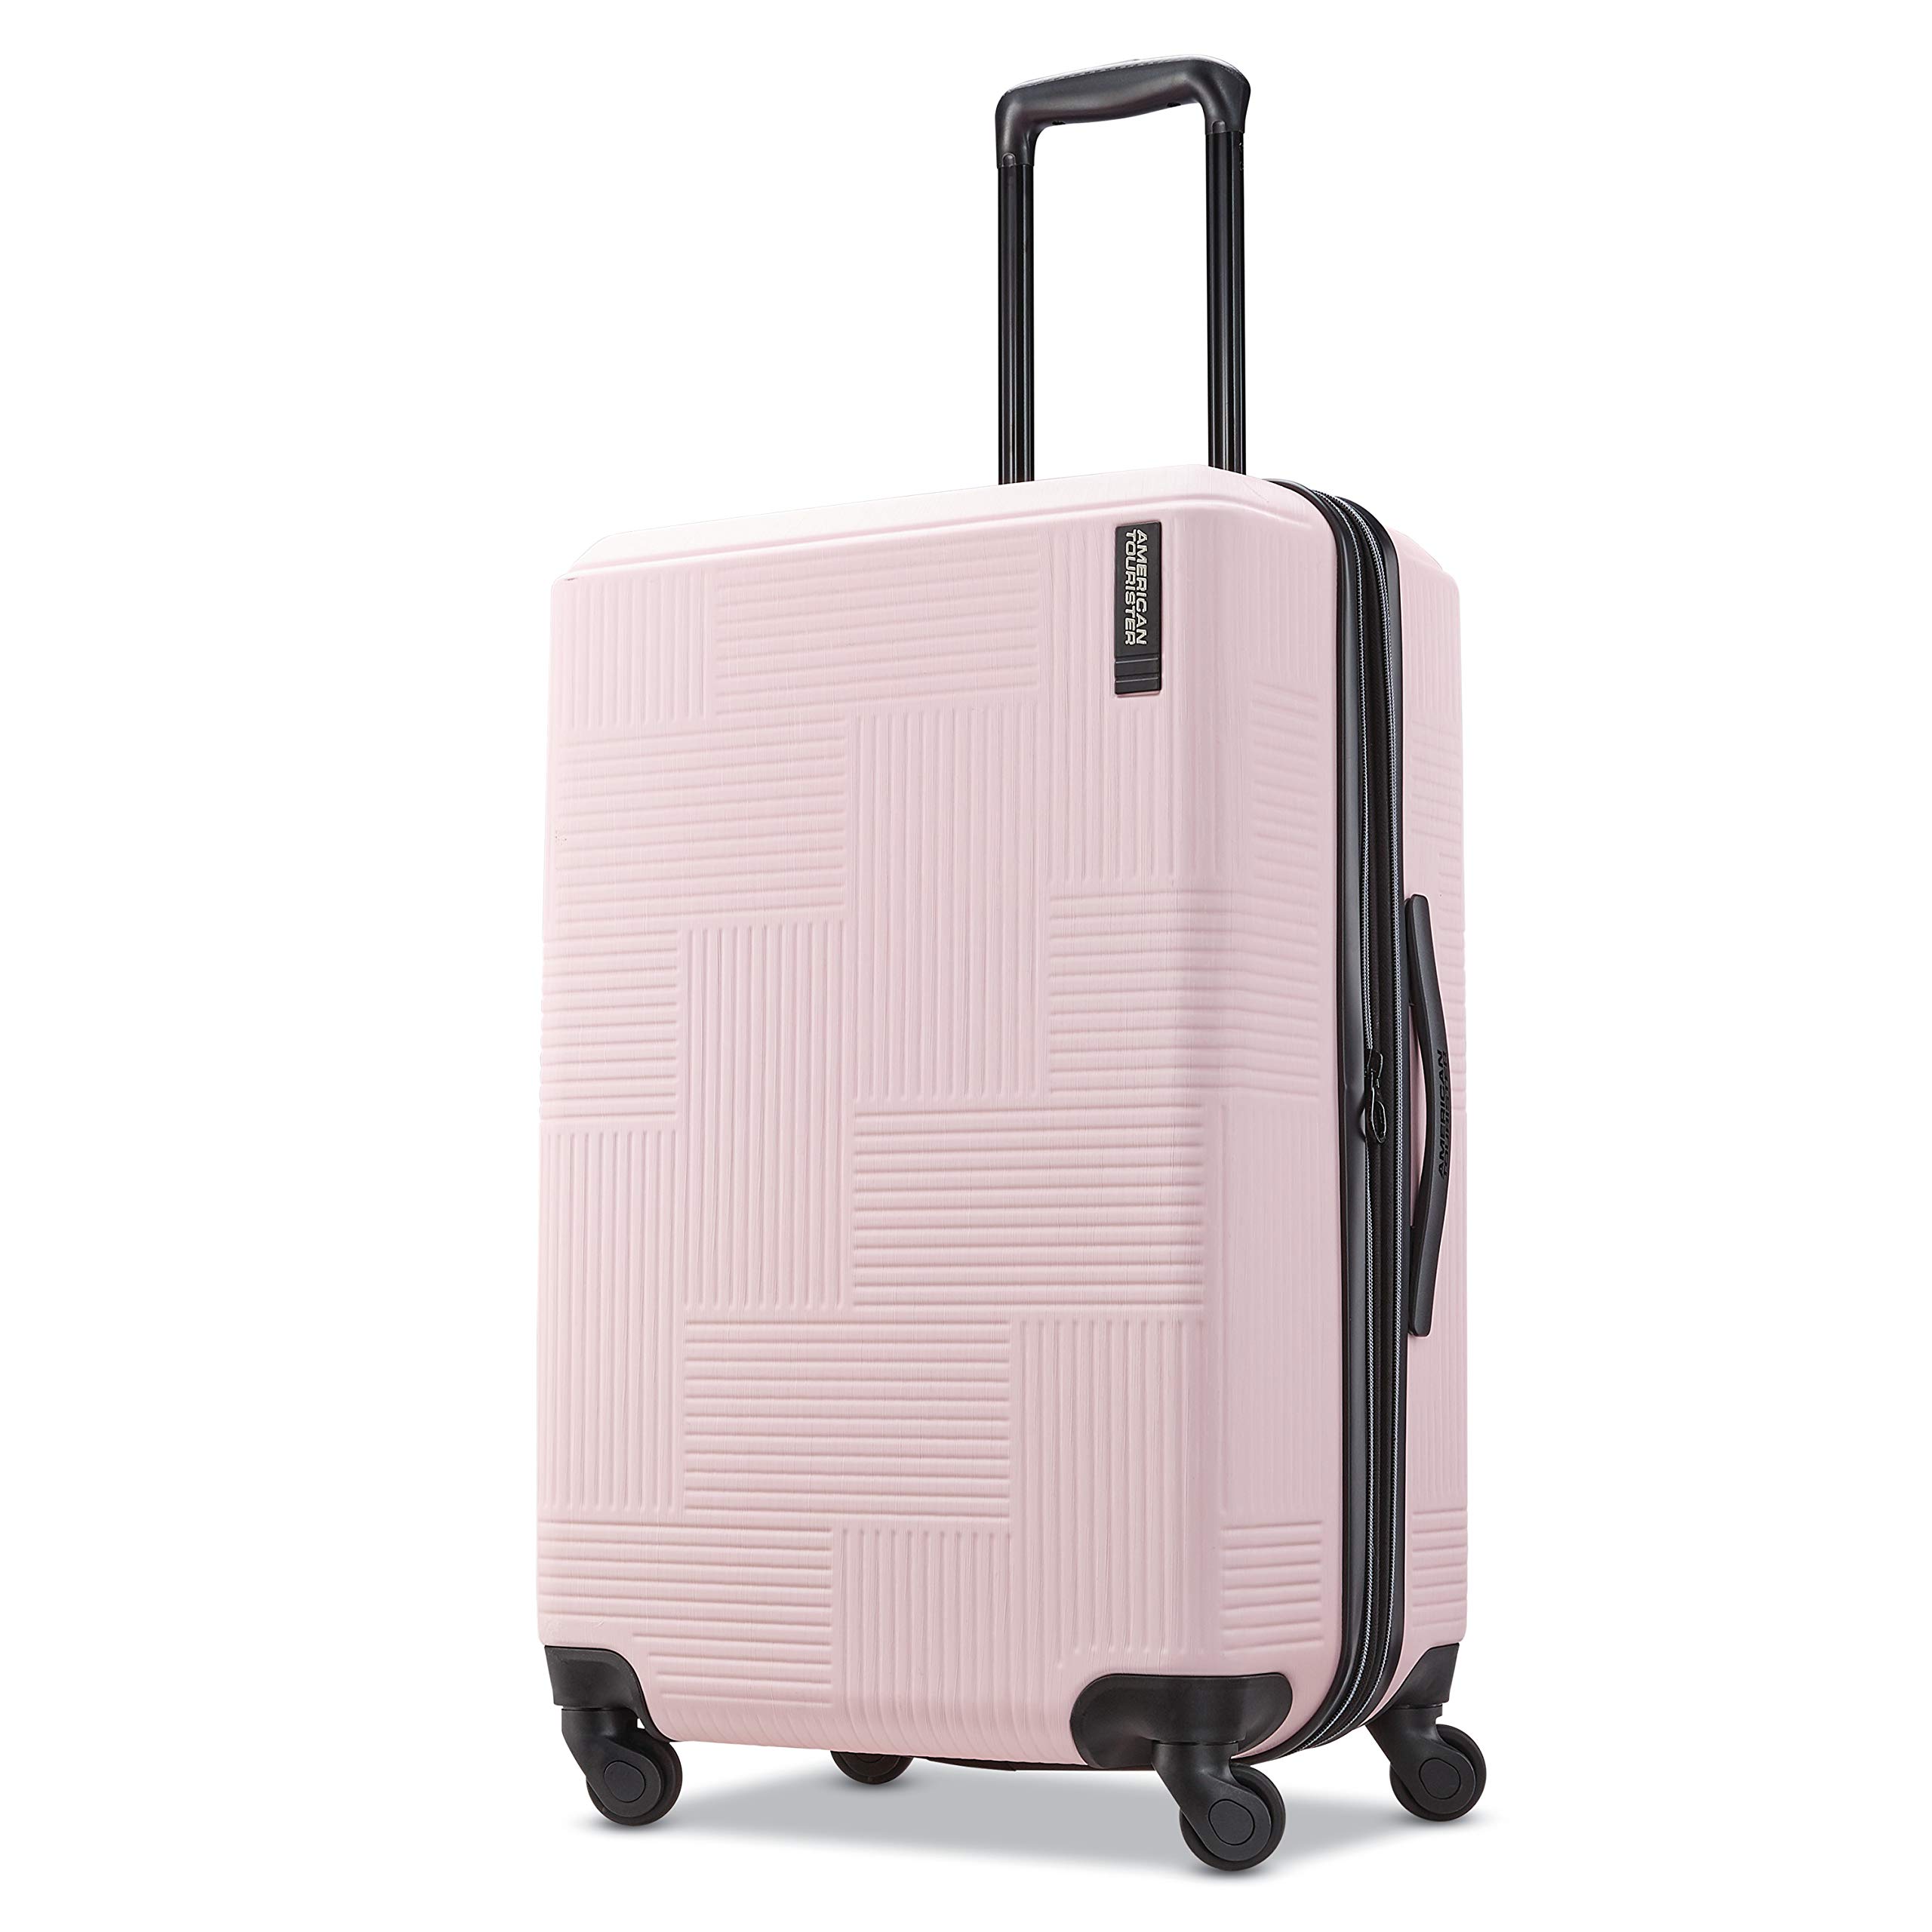 Stratum XLT Expandable Hardside Luggage with Spinner Wheels, Pink Blush, Checked-Medium 25-Inch